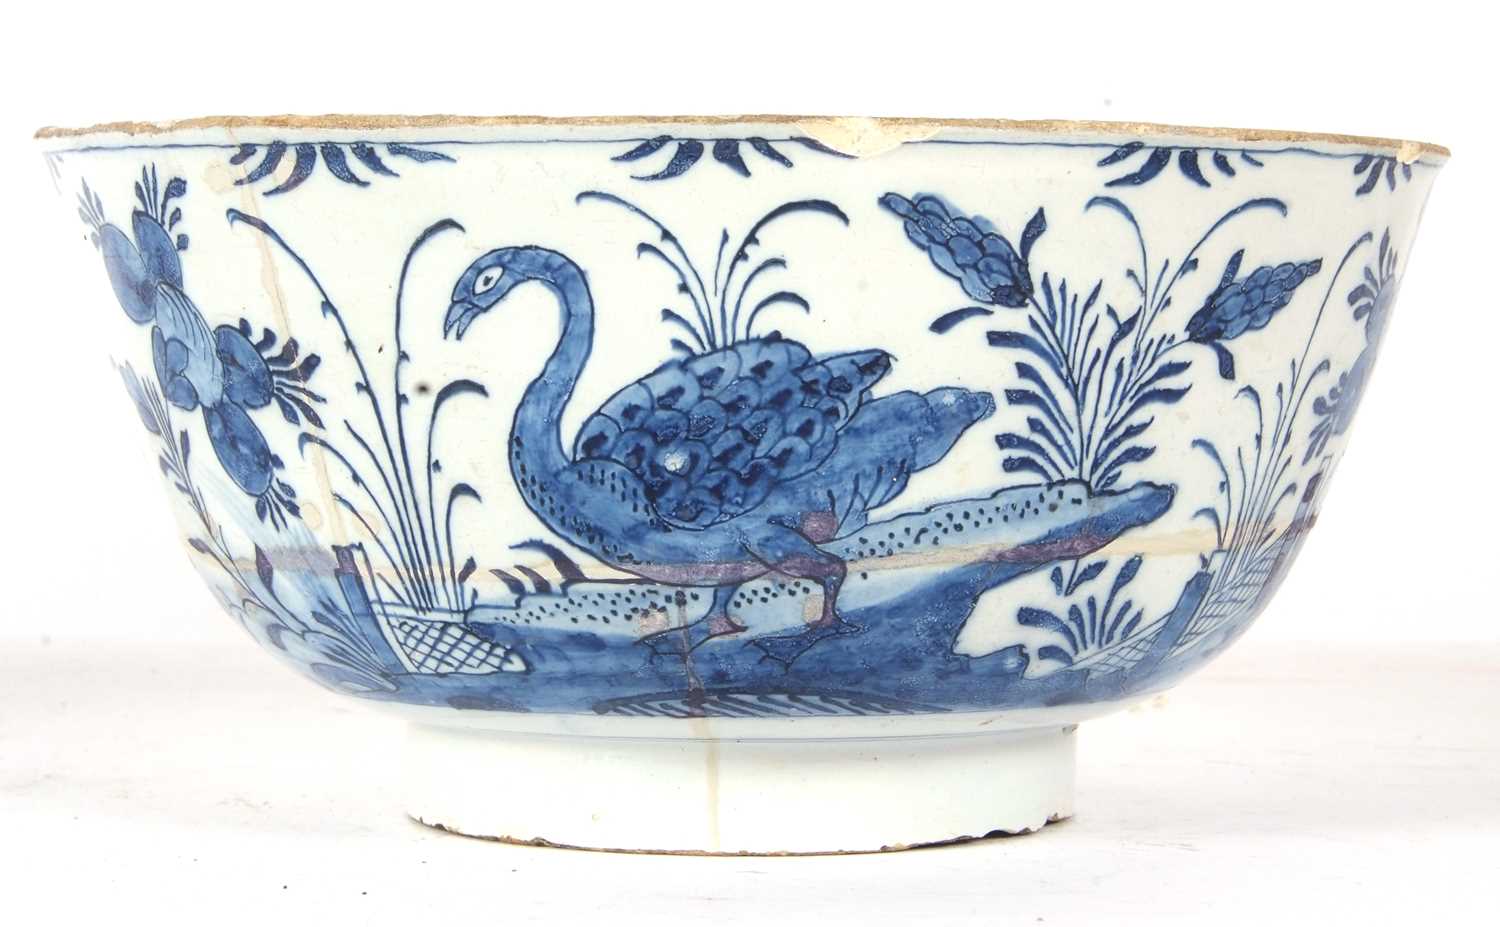 An early 18th Century English Delft punch bowl, circa 1730 with blue and white Chinese porcelain - Image 2 of 6